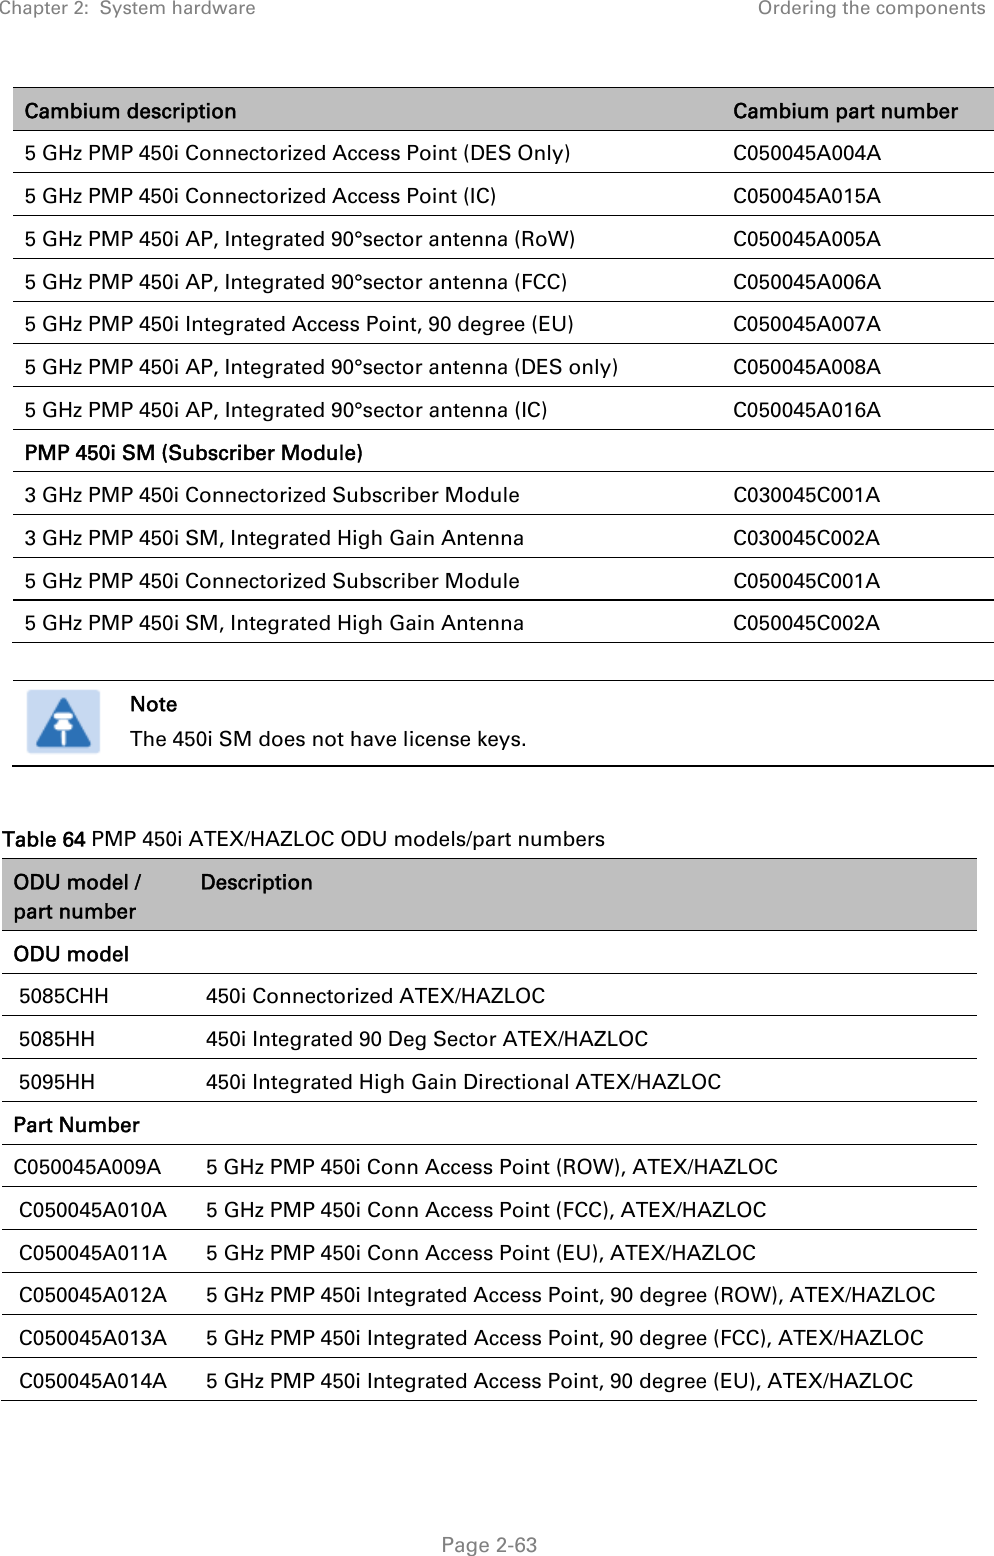 Chapter 2:  System hardware  Ordering the components   Page 2-63 Cambium description  Cambium part number 5 GHz PMP 450i Connectorized Access Point (DES Only)  C050045A004A 5 GHz PMP 450i Connectorized Access Point (IC)  C050045A015A 5 GHz PMP 450i AP, Integrated 90°sector antenna (RoW)  C050045A005A 5 GHz PMP 450i AP, Integrated 90°sector antenna (FCC)  C050045A006A 5 GHz PMP 450i Integrated Access Point, 90 degree (EU)  C050045A007A 5 GHz PMP 450i AP, Integrated 90°sector antenna (DES only)  C050045A008A 5 GHz PMP 450i AP, Integrated 90°sector antenna (IC)  C050045A016A PMP 450i SM (Subscriber Module)   3 GHz PMP 450i Connectorized Subscriber Module  C030045C001A 3 GHz PMP 450i SM, Integrated High Gain Antenna  C030045C002A 5 GHz PMP 450i Connectorized Subscriber Module  C050045C001A 5 GHz PMP 450i SM, Integrated High Gain Antenna  C050045C002A   Note The 450i SM does not have license keys.  Table 64 PMP 450i ATEX/HAZLOC ODU models/part numbers ODU model / part number Description ODU model    5085CHH    450i Connectorized ATEX/HAZLOC   5085HH    450i Integrated 90 Deg Sector ATEX/HAZLOC   5095HH    450i Integrated High Gain Directional ATEX/HAZLOC  Part Number   C050045A009A    5 GHz PMP 450i Conn Access Point (ROW), ATEX/HAZLOC   C050045A010A    5 GHz PMP 450i Conn Access Point (FCC), ATEX/HAZLOC   C050045A011A    5 GHz PMP 450i Conn Access Point (EU), ATEX/HAZLOC   C050045A012A    5 GHz PMP 450i Integrated Access Point, 90 degree (ROW), ATEX/HAZLOC   C050045A013A    5 GHz PMP 450i Integrated Access Point, 90 degree (FCC), ATEX/HAZLOC   C050045A014A    5 GHz PMP 450i Integrated Access Point, 90 degree (EU), ATEX/HAZLOC  